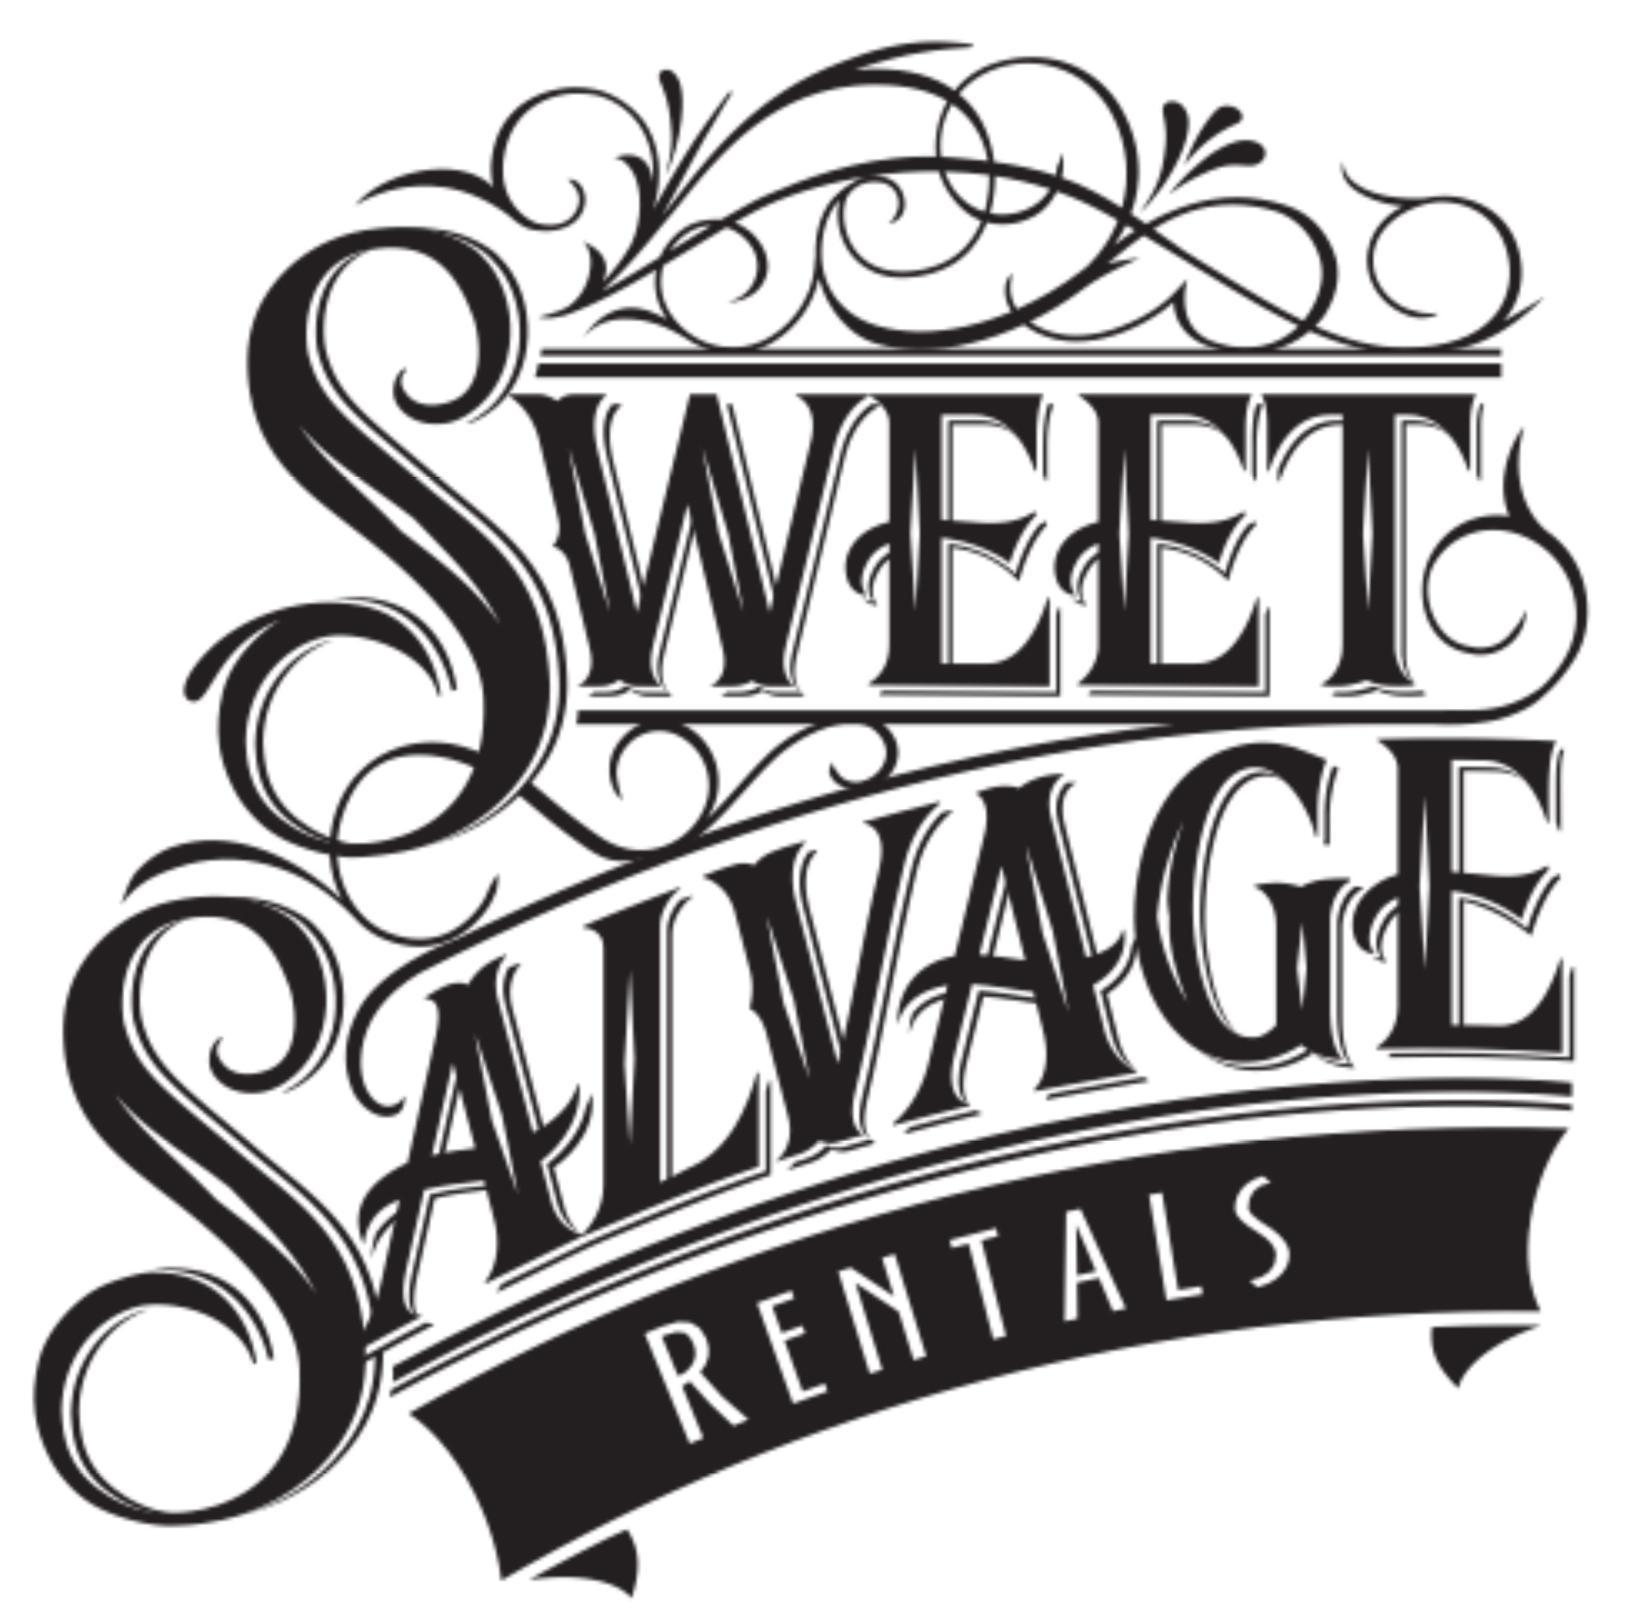 1SweetSalvage Profile Picture